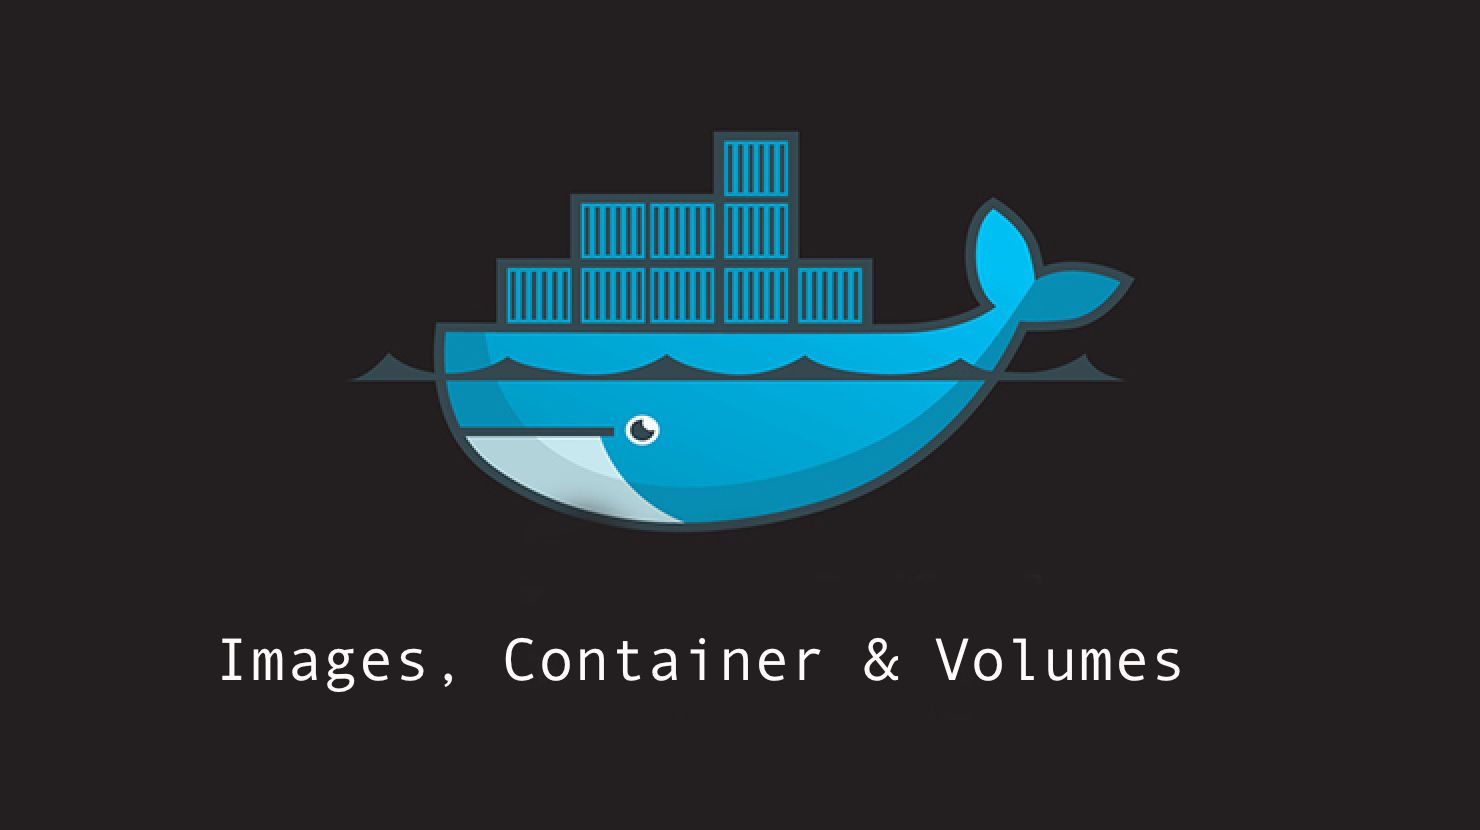 Docker Image Guide: How to Delete Docker Images, Stop Containers, and Remove all Volumes